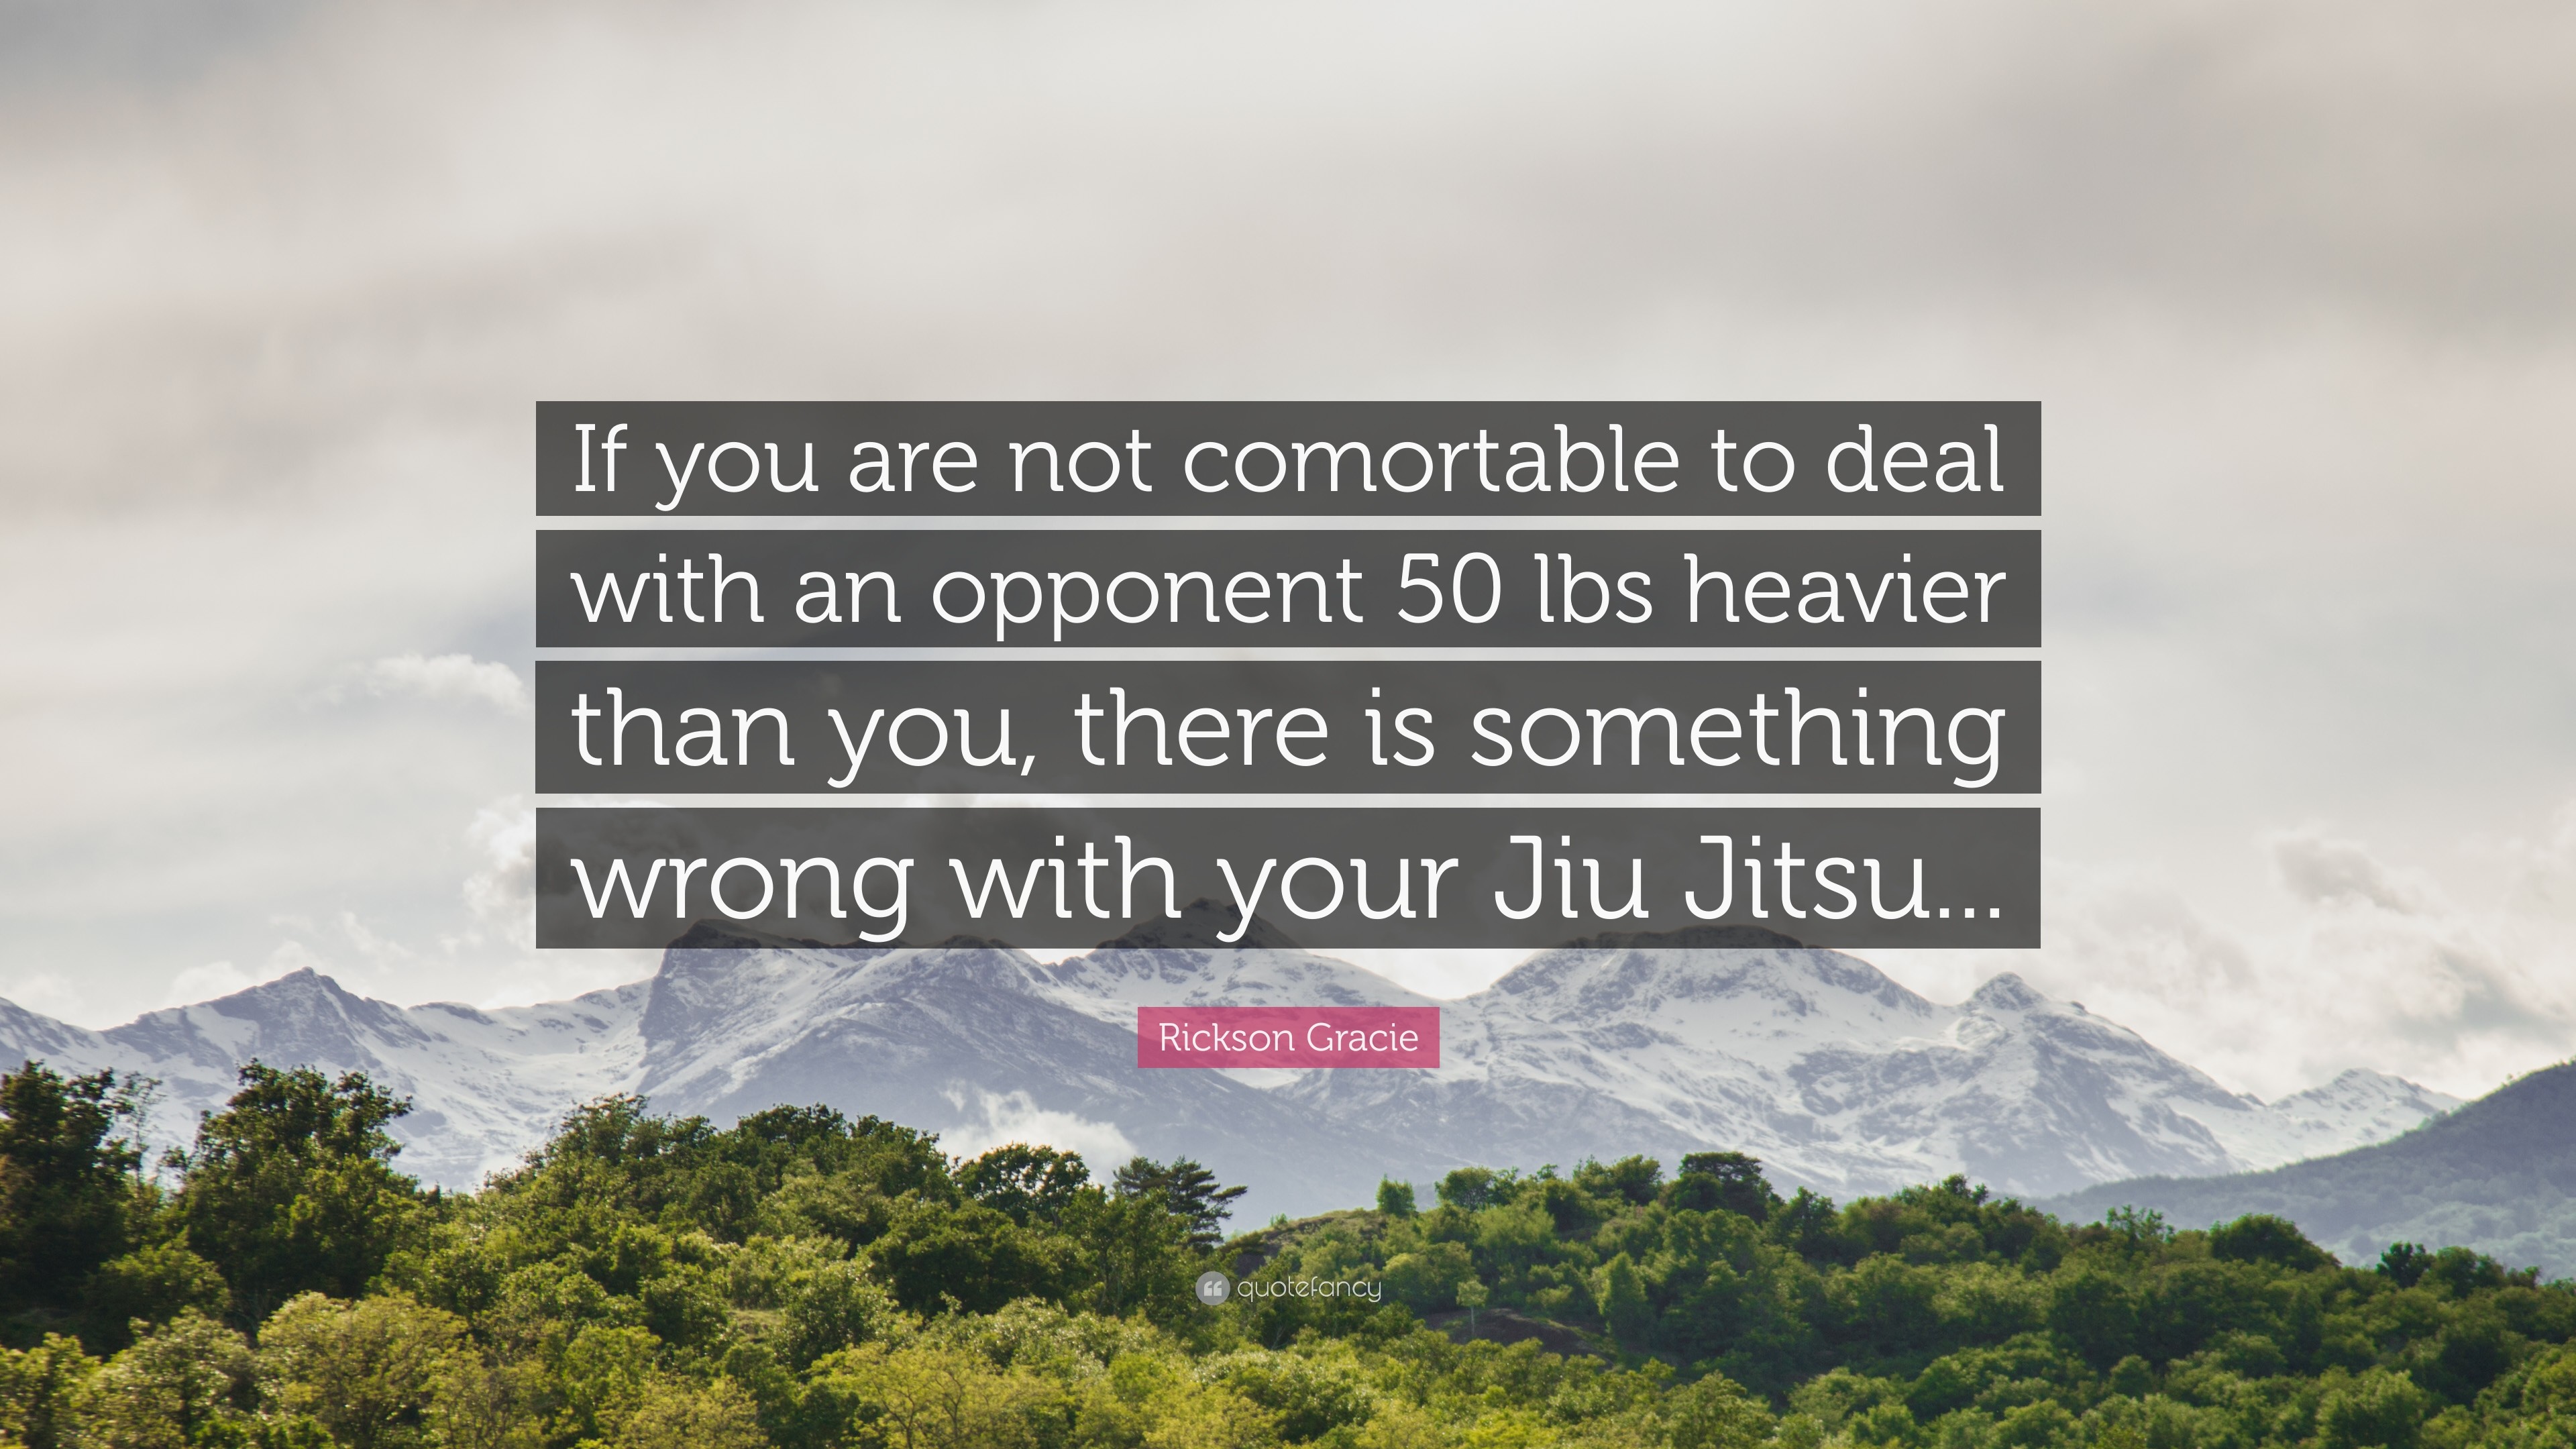 3840x2160 Rickson Gracie Quote: “If you are not comortable to deal with an opponent 50